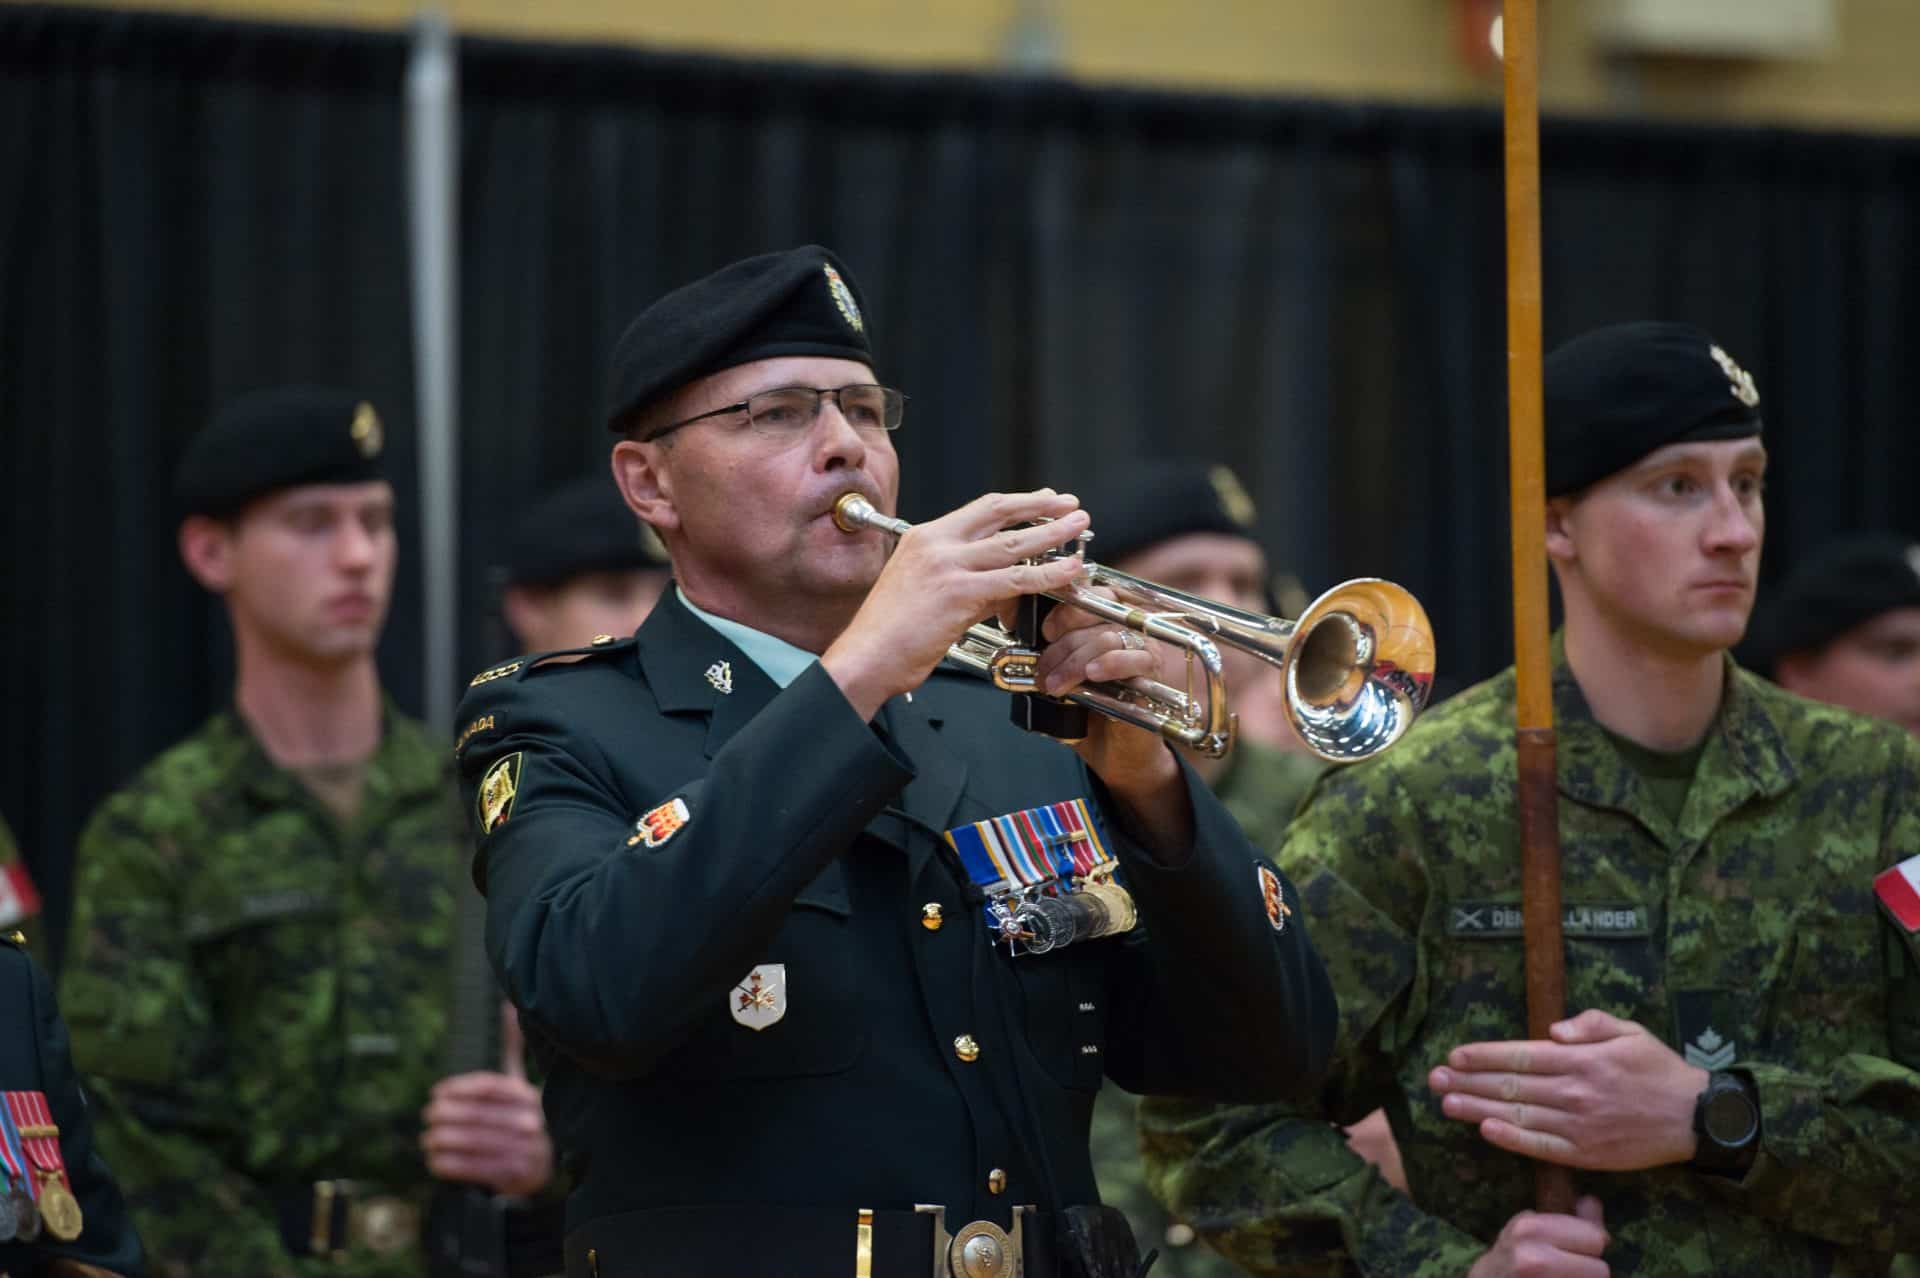 military man playing trumpet at griesbach